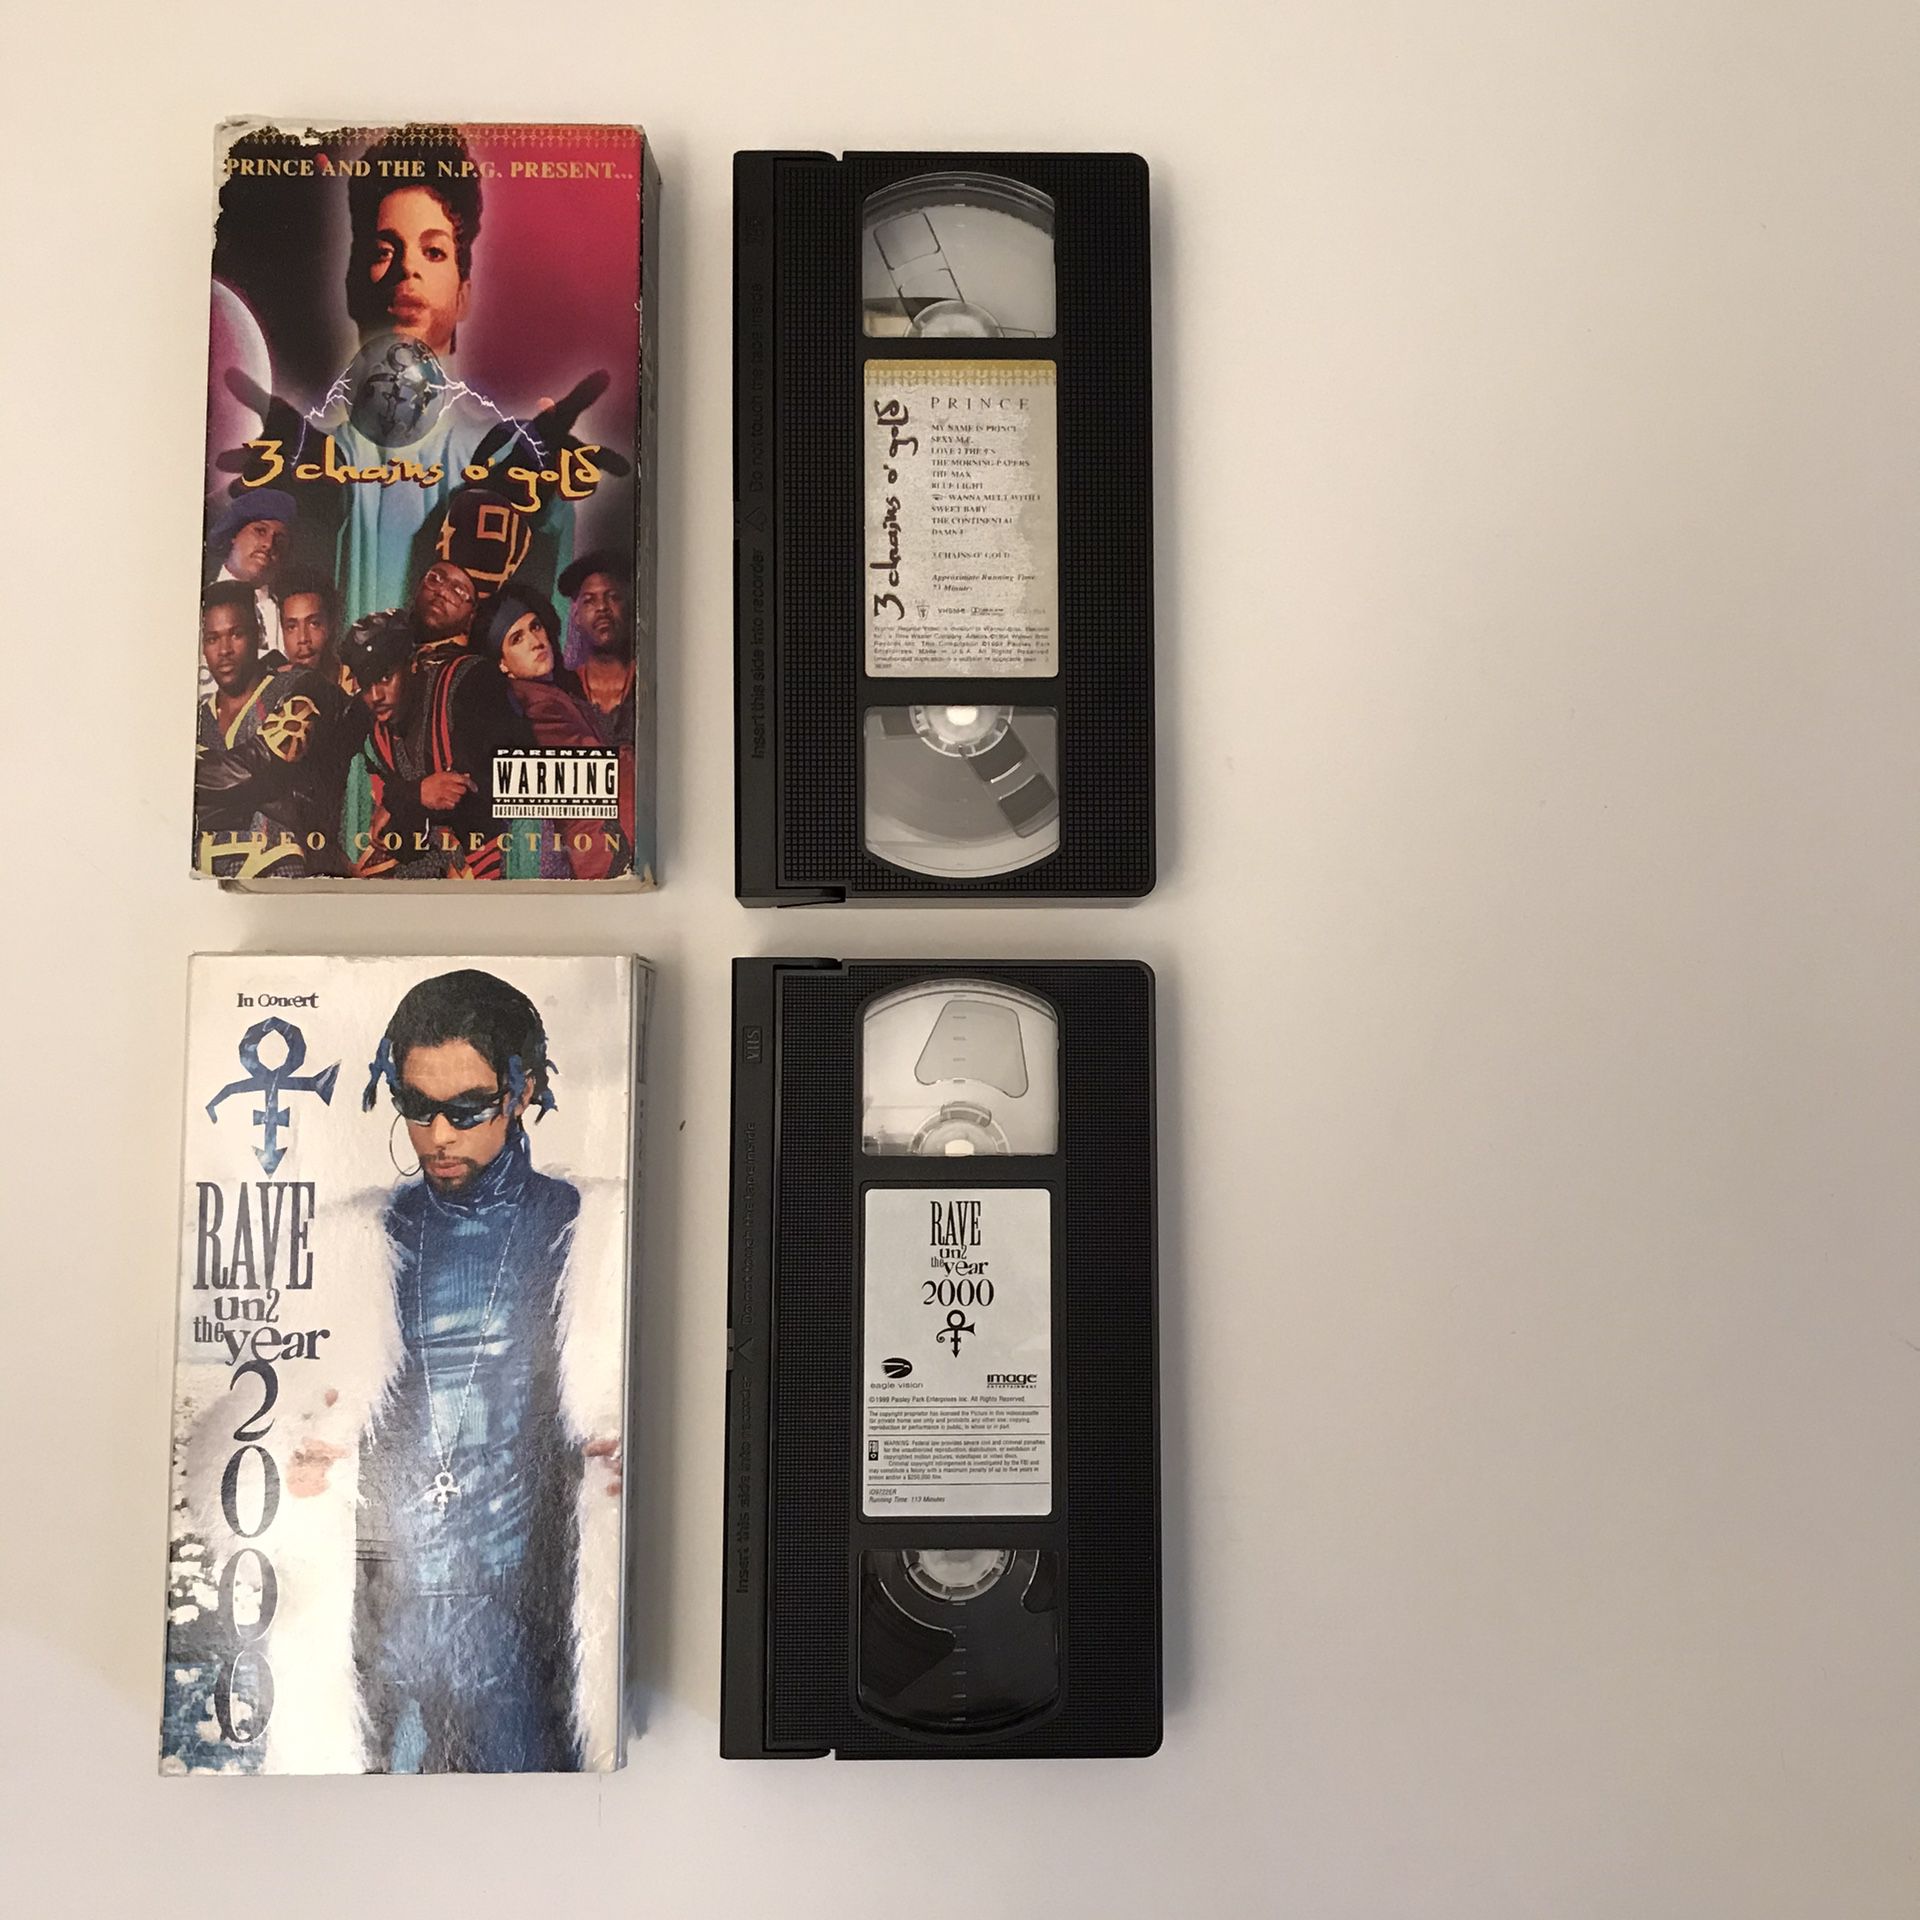 Prince movies vhs music video tapes rave year 2000 3 chains o gold